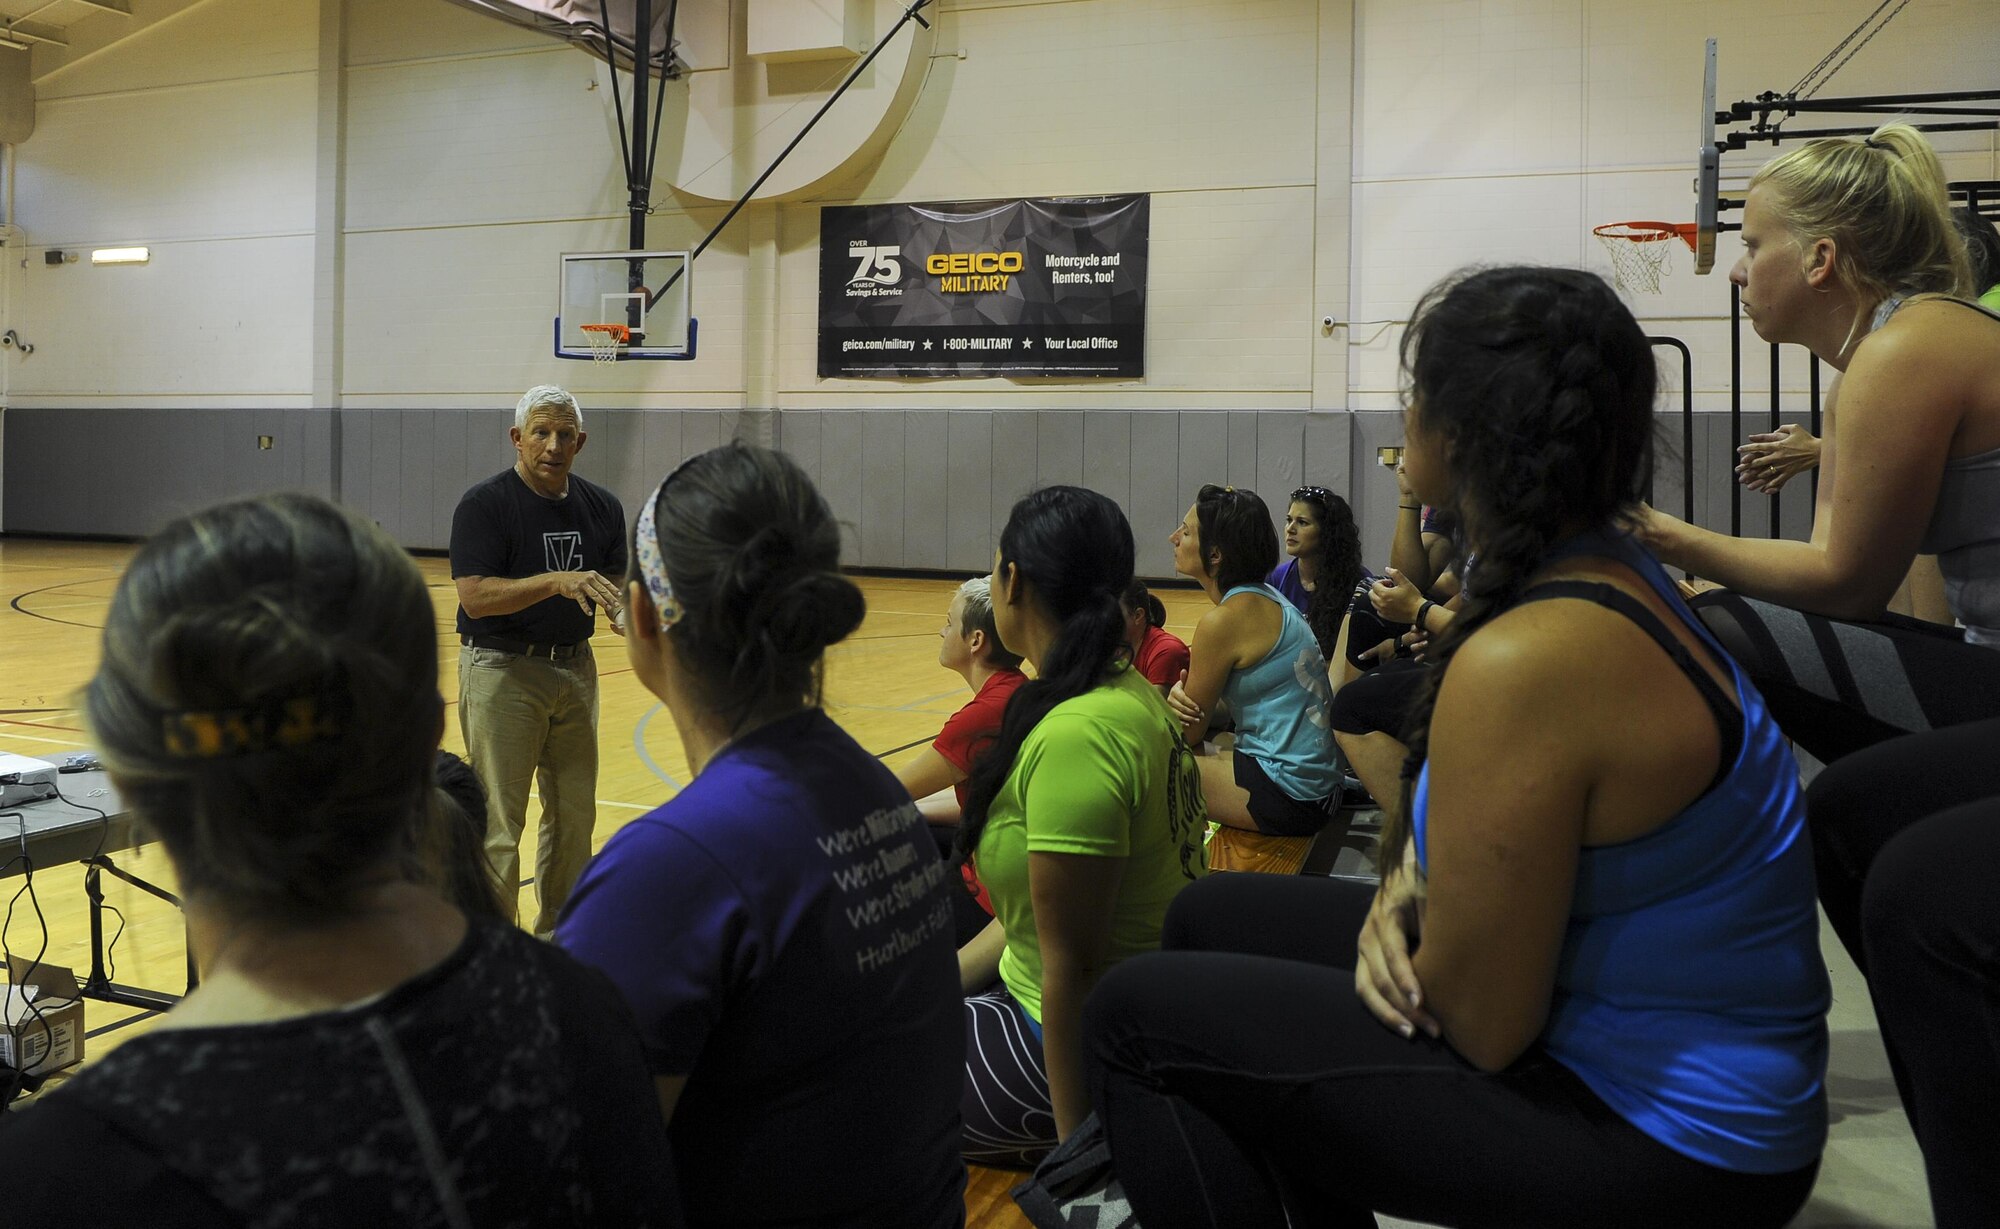 Michael “Moose” Moore, founder and CEO of The Vigilance Group, gives a presentation to a group of Air Commando spouses on awareness, avoidance and actions to take during assaults at Hurlburt Field, March 31, 2017. The Stroller Warriors Running Club hosted The Vigilance Group to offer individuals the opportunity to learn preventive security training. Techniques such as hammer fists, palm strikes, chock defenses and bear hug escapes were demonstrated. (U.S. Air Force photo by Airman 1st Class Isaac O. Guest IV)